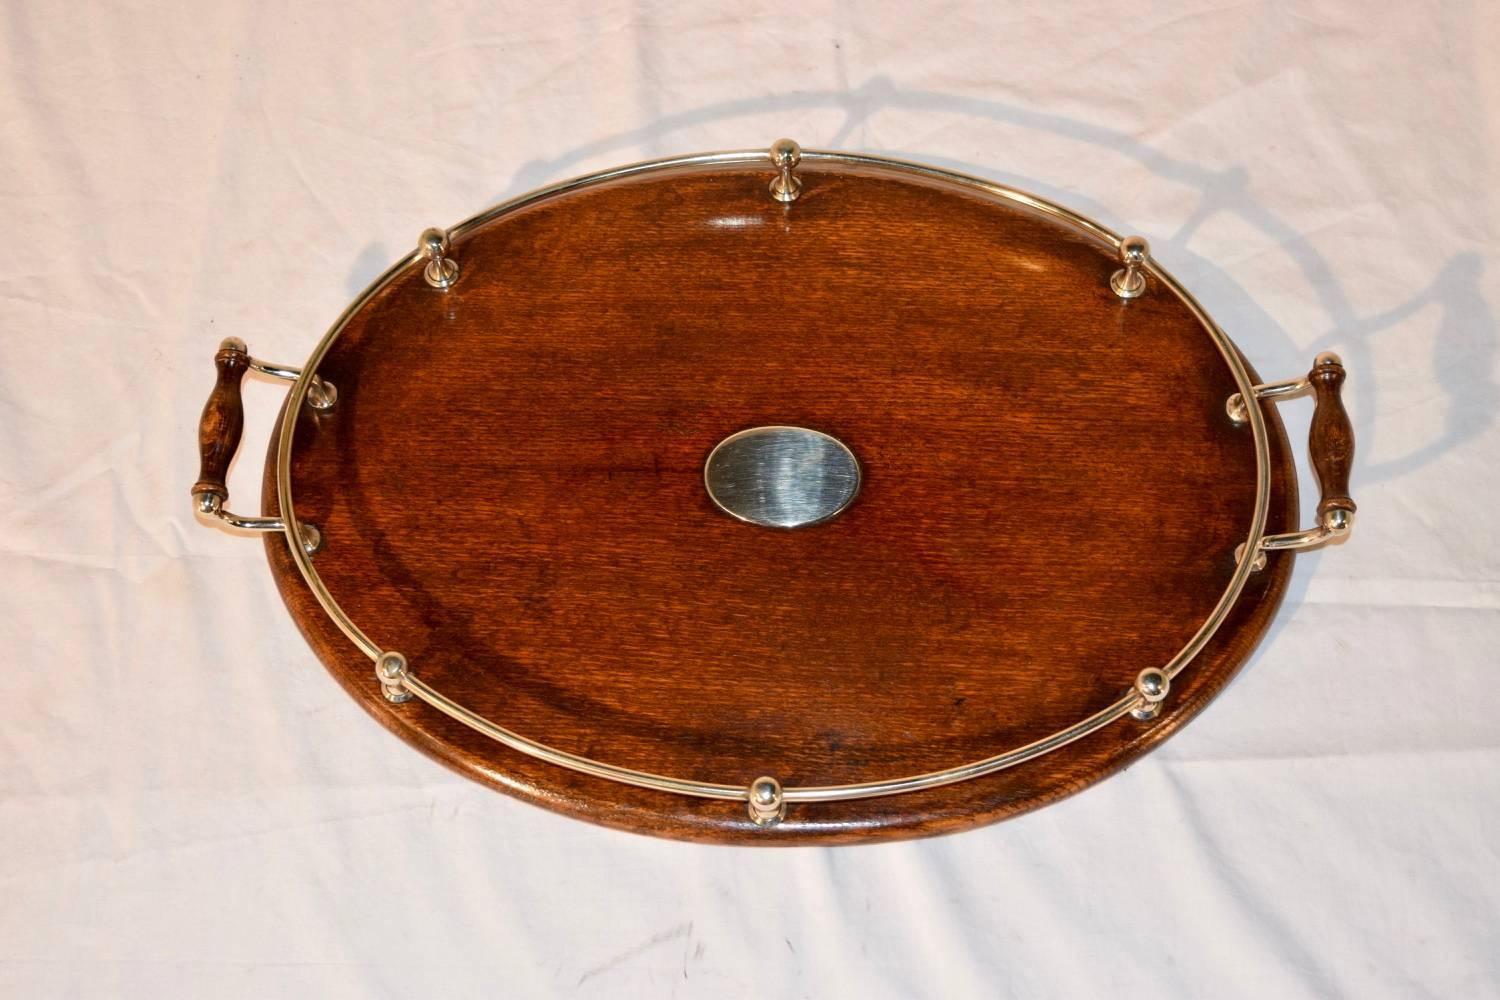 English oak tray with silver-plated gallery and central plaque, circa 1900.